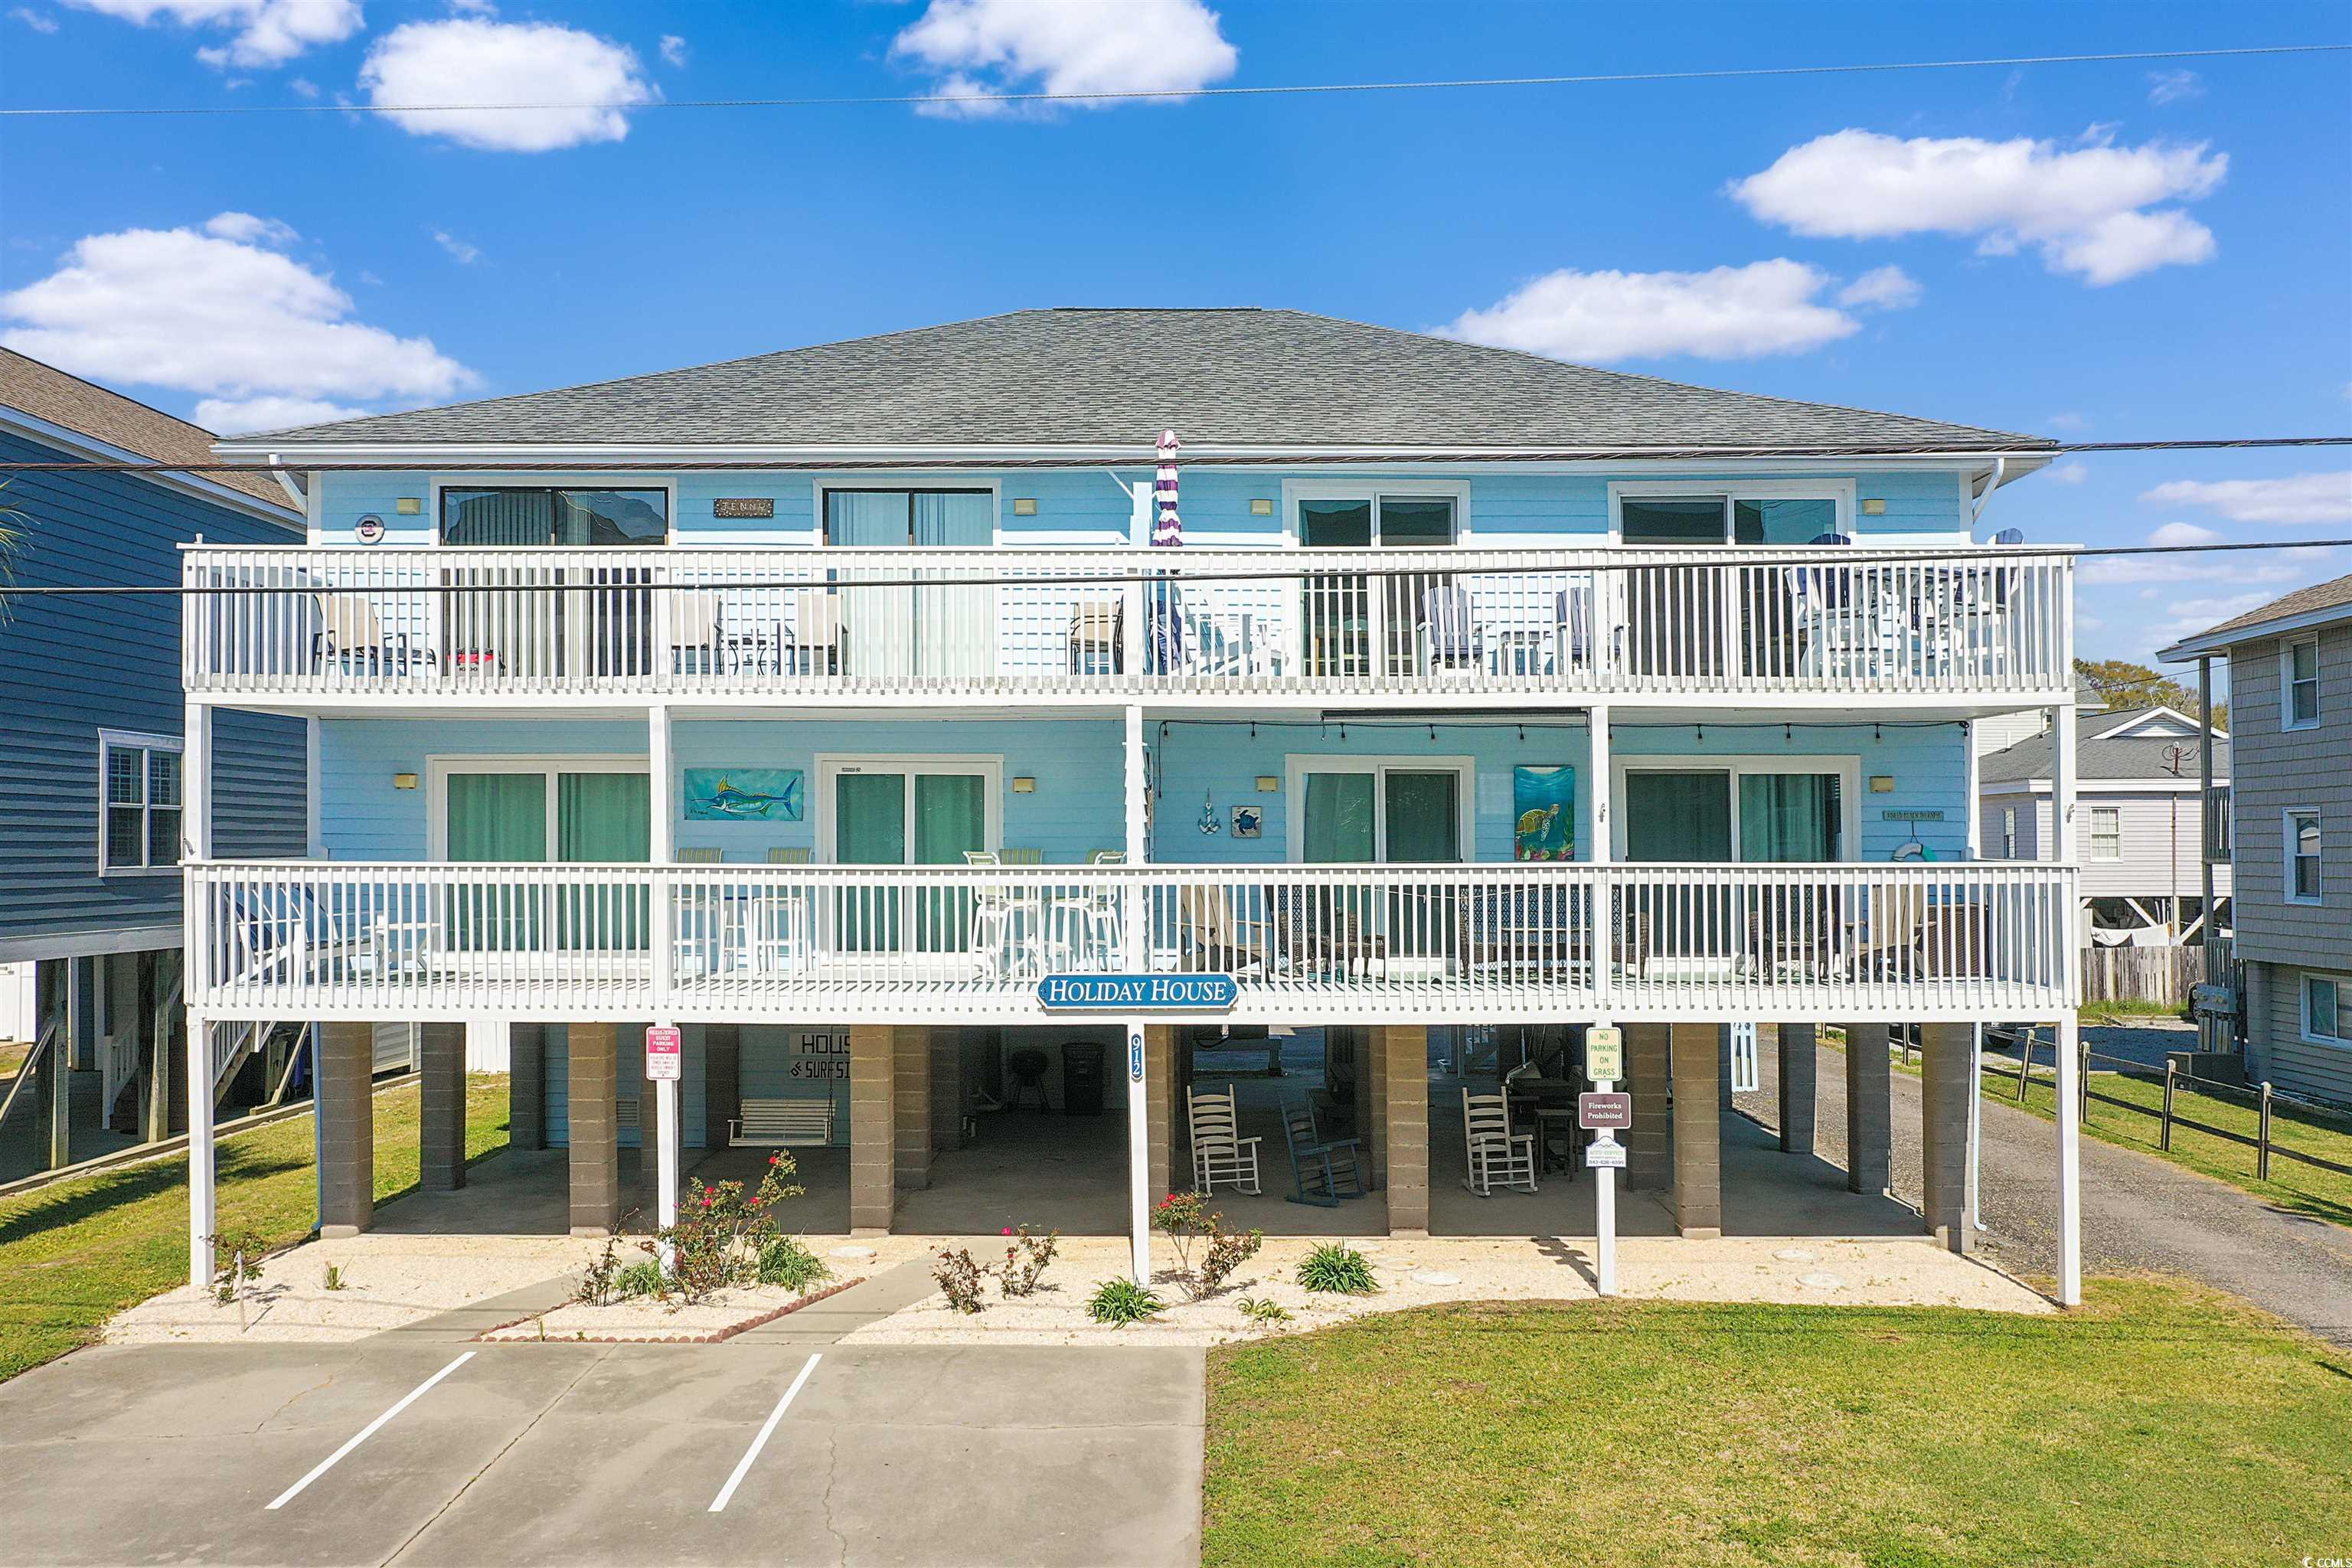 immerse yourself in coastal living with this stunning 3-bedroom, 2-bathroom condo situated in the holiday house complex, just steps away from the pristine white sandy beach. this second-row residence offers a tastefully updated interior, stylish furnishings, smooth flat ceilings with fans, and a generously sized living room that showcases sliding glass doors that opens up to a charming balcony with ocean peek views. the cheerful kitchen is a delight, equipped with a breakfast bar, a range, dishwasher, refrigerator, and ample counter and cabinet spaces. the master bedroom suite boasts his & hers closets, private access to the master bath, featuring a vanity with a single sink, a comfort station, and a timeless tub/shower combo. this condo is completed with two additional bedrooms, a full guest bath, a laundry closet, and extra closet storage. this condo not only provides easy access to the beach and golfing but also immerses you in the vibrant lifestyle of surfside beach. enjoy proximity to fun eateries, award-winning off-broadway shows, public fishing piers, and captivating shopping adventures along the grand strand. additionally, the location is convenient for everyday needs, including grocery stores, banks, post offices, medical centers, doctors' offices, and pharmacies. experience this coastal paradise with our state-of-the-art 3-d virtual tour. put yourself in the heart of beachside luxury and make this condo your ideal home or vacation retreat.